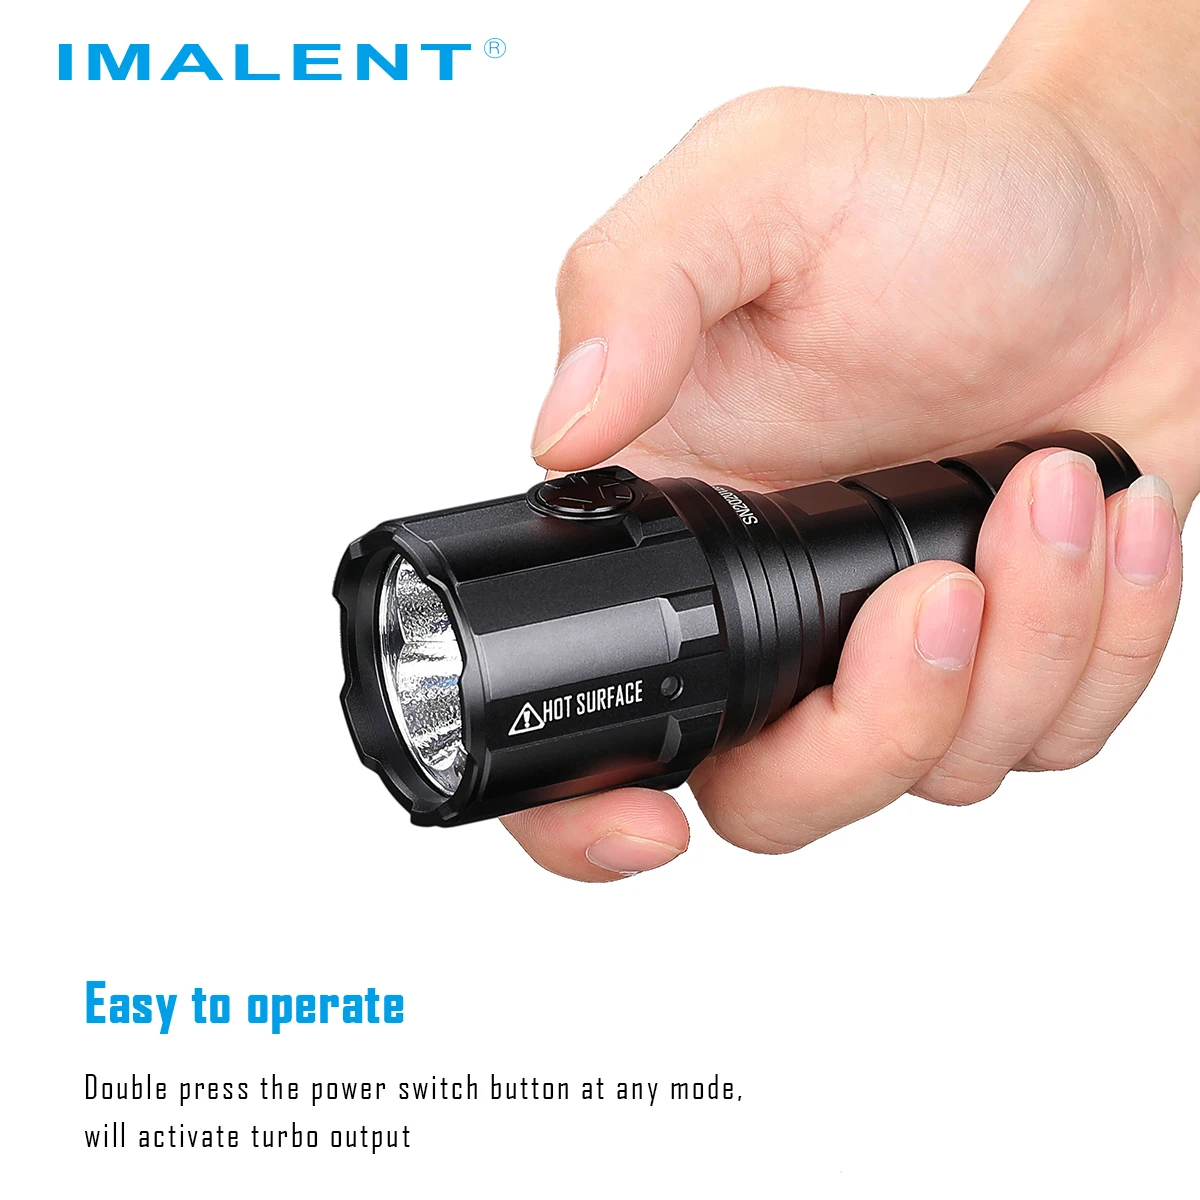 IMALENT R30C MINI Flashlight Camping Professional Waterproof Convoy Cree Led Lamp Portable Rechargeable Outdoor Emergency Torch